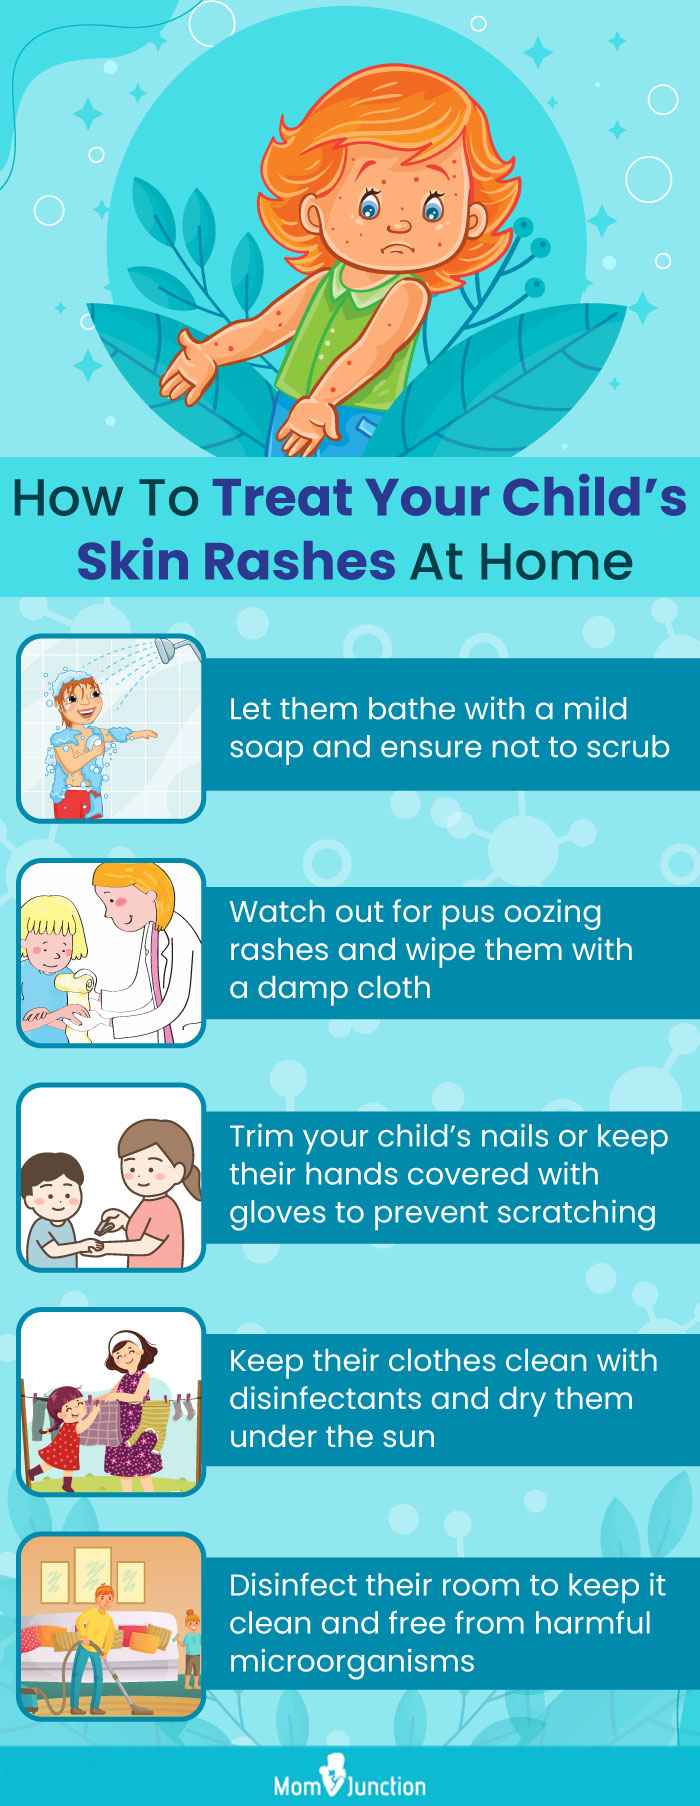 how to treat your child’s skin rashes at home (infographic)